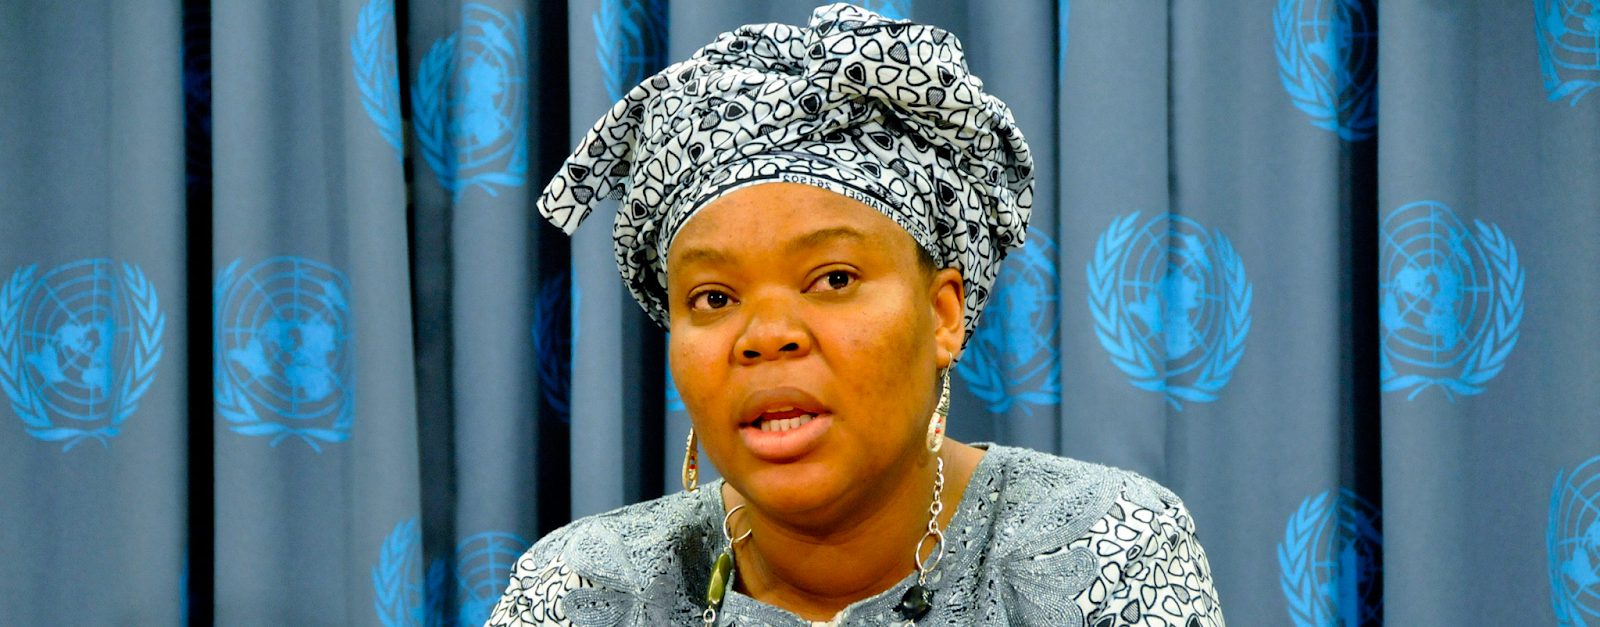 A picture of Leymah Gbowee leading a peacebuilding workshop with Sustainable solutions to tackle poverty.